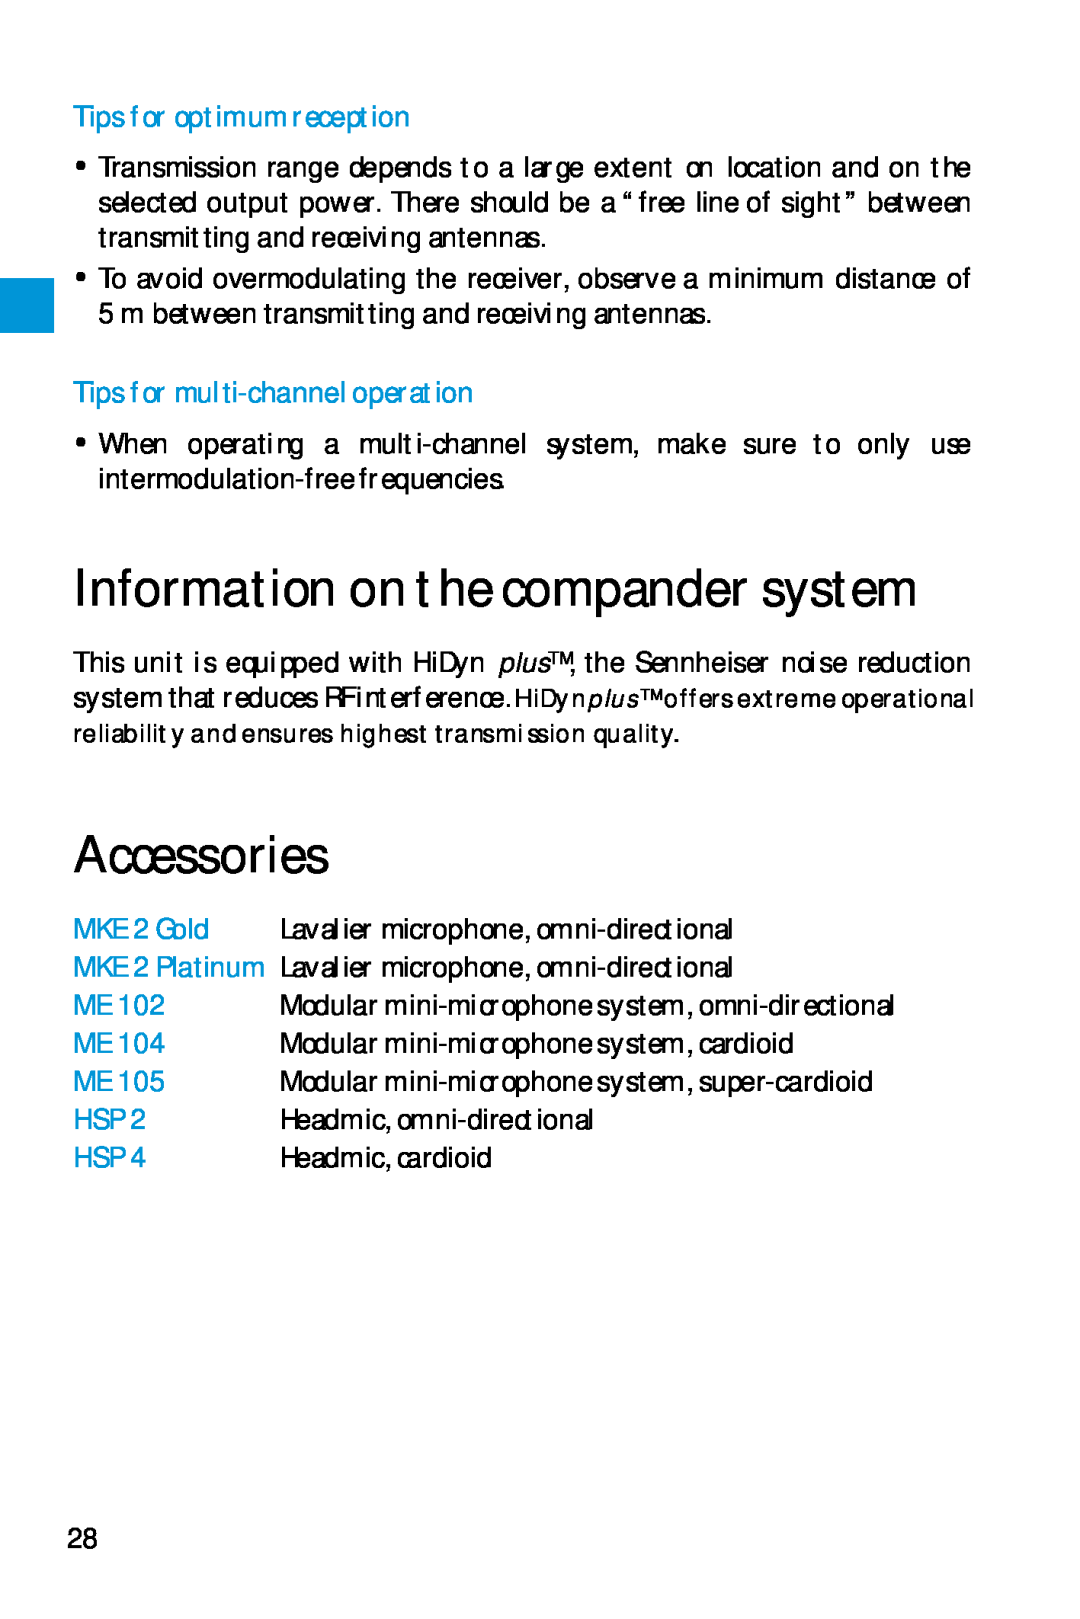 Sennheiser SK 5212 manual Information on the compander system, Accessories 